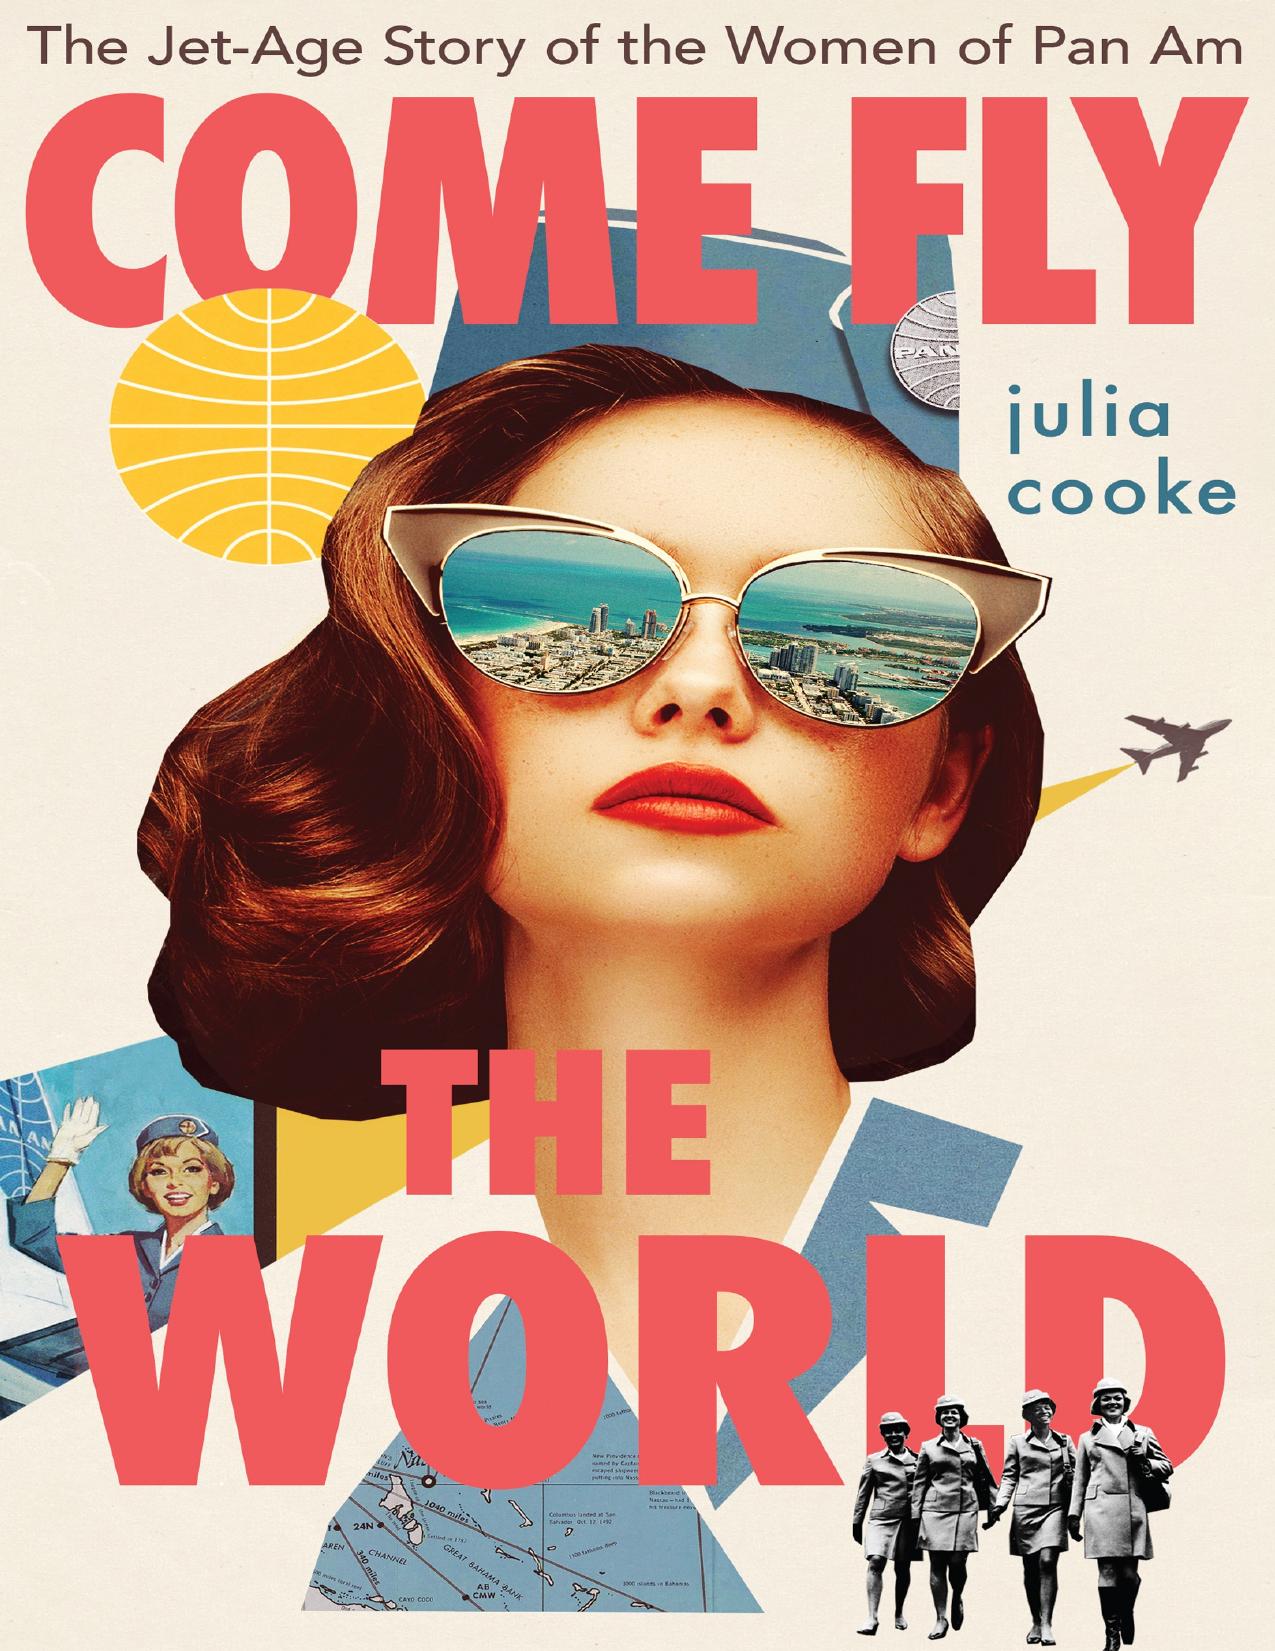 Come Fly The World by Julia Cooke PDF, EPUB Free Download